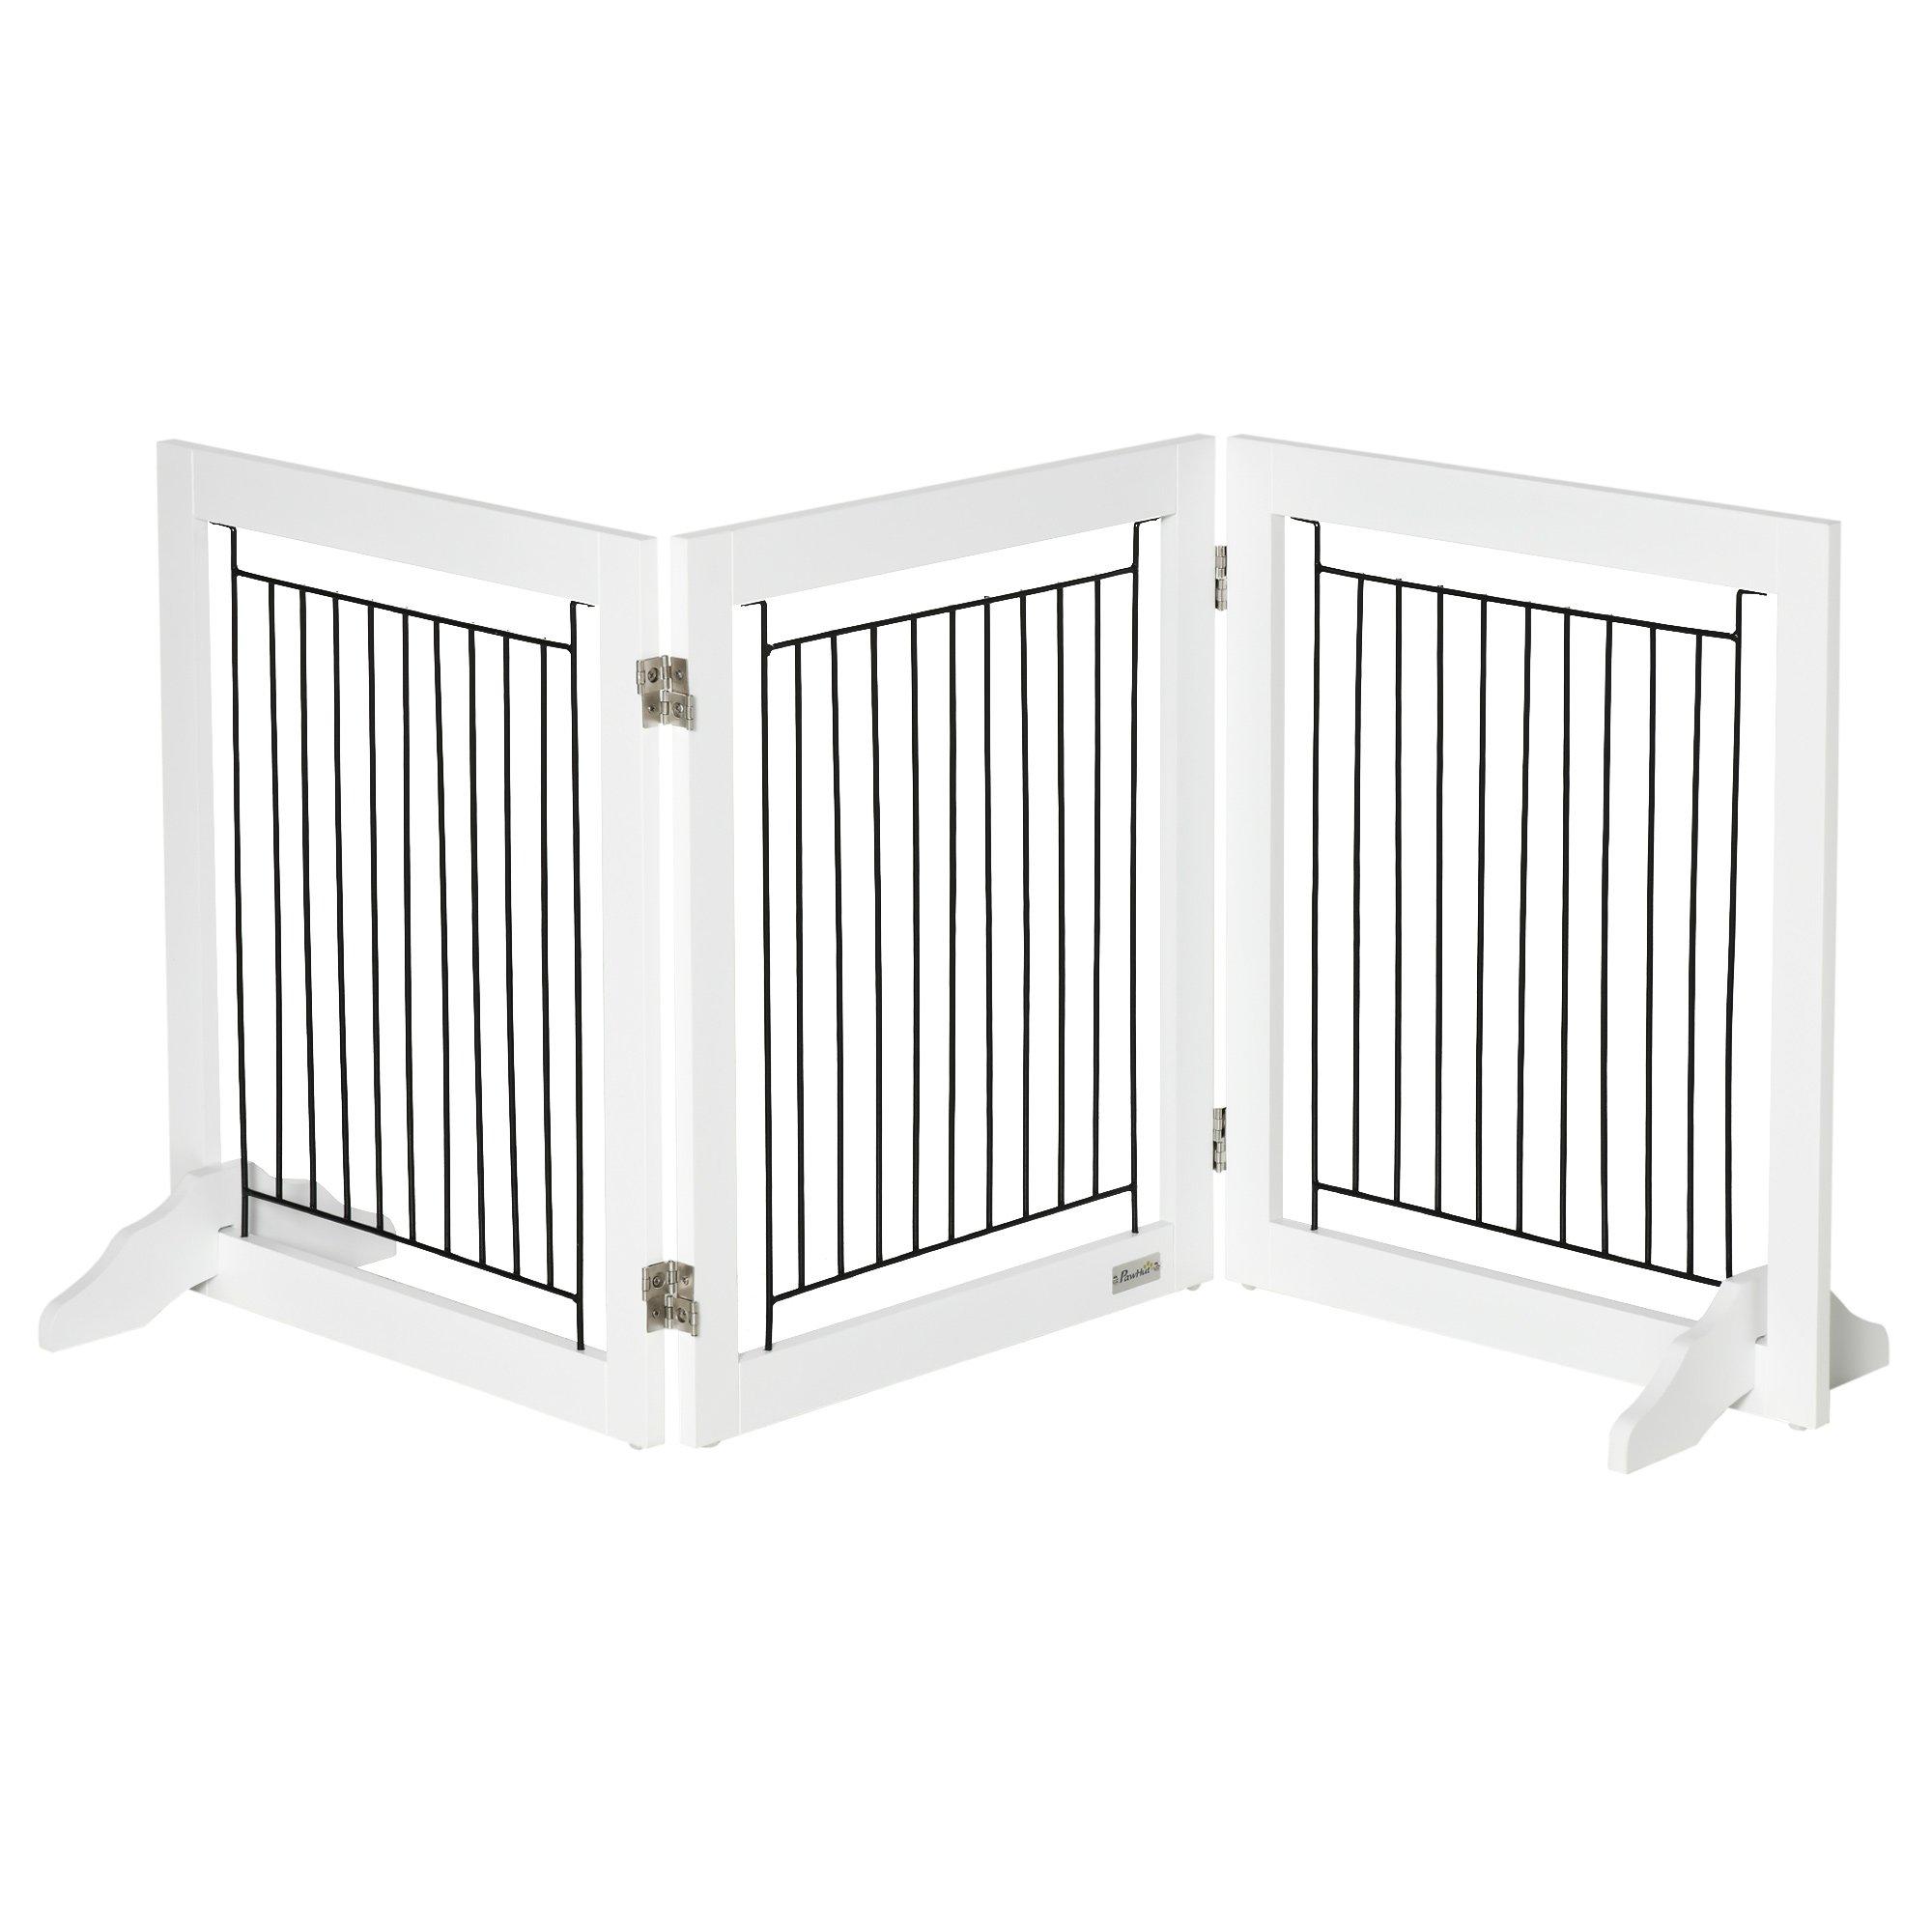 Foldable Dog Gate Freestanding Wooden Pet Barrier with 3 Panels